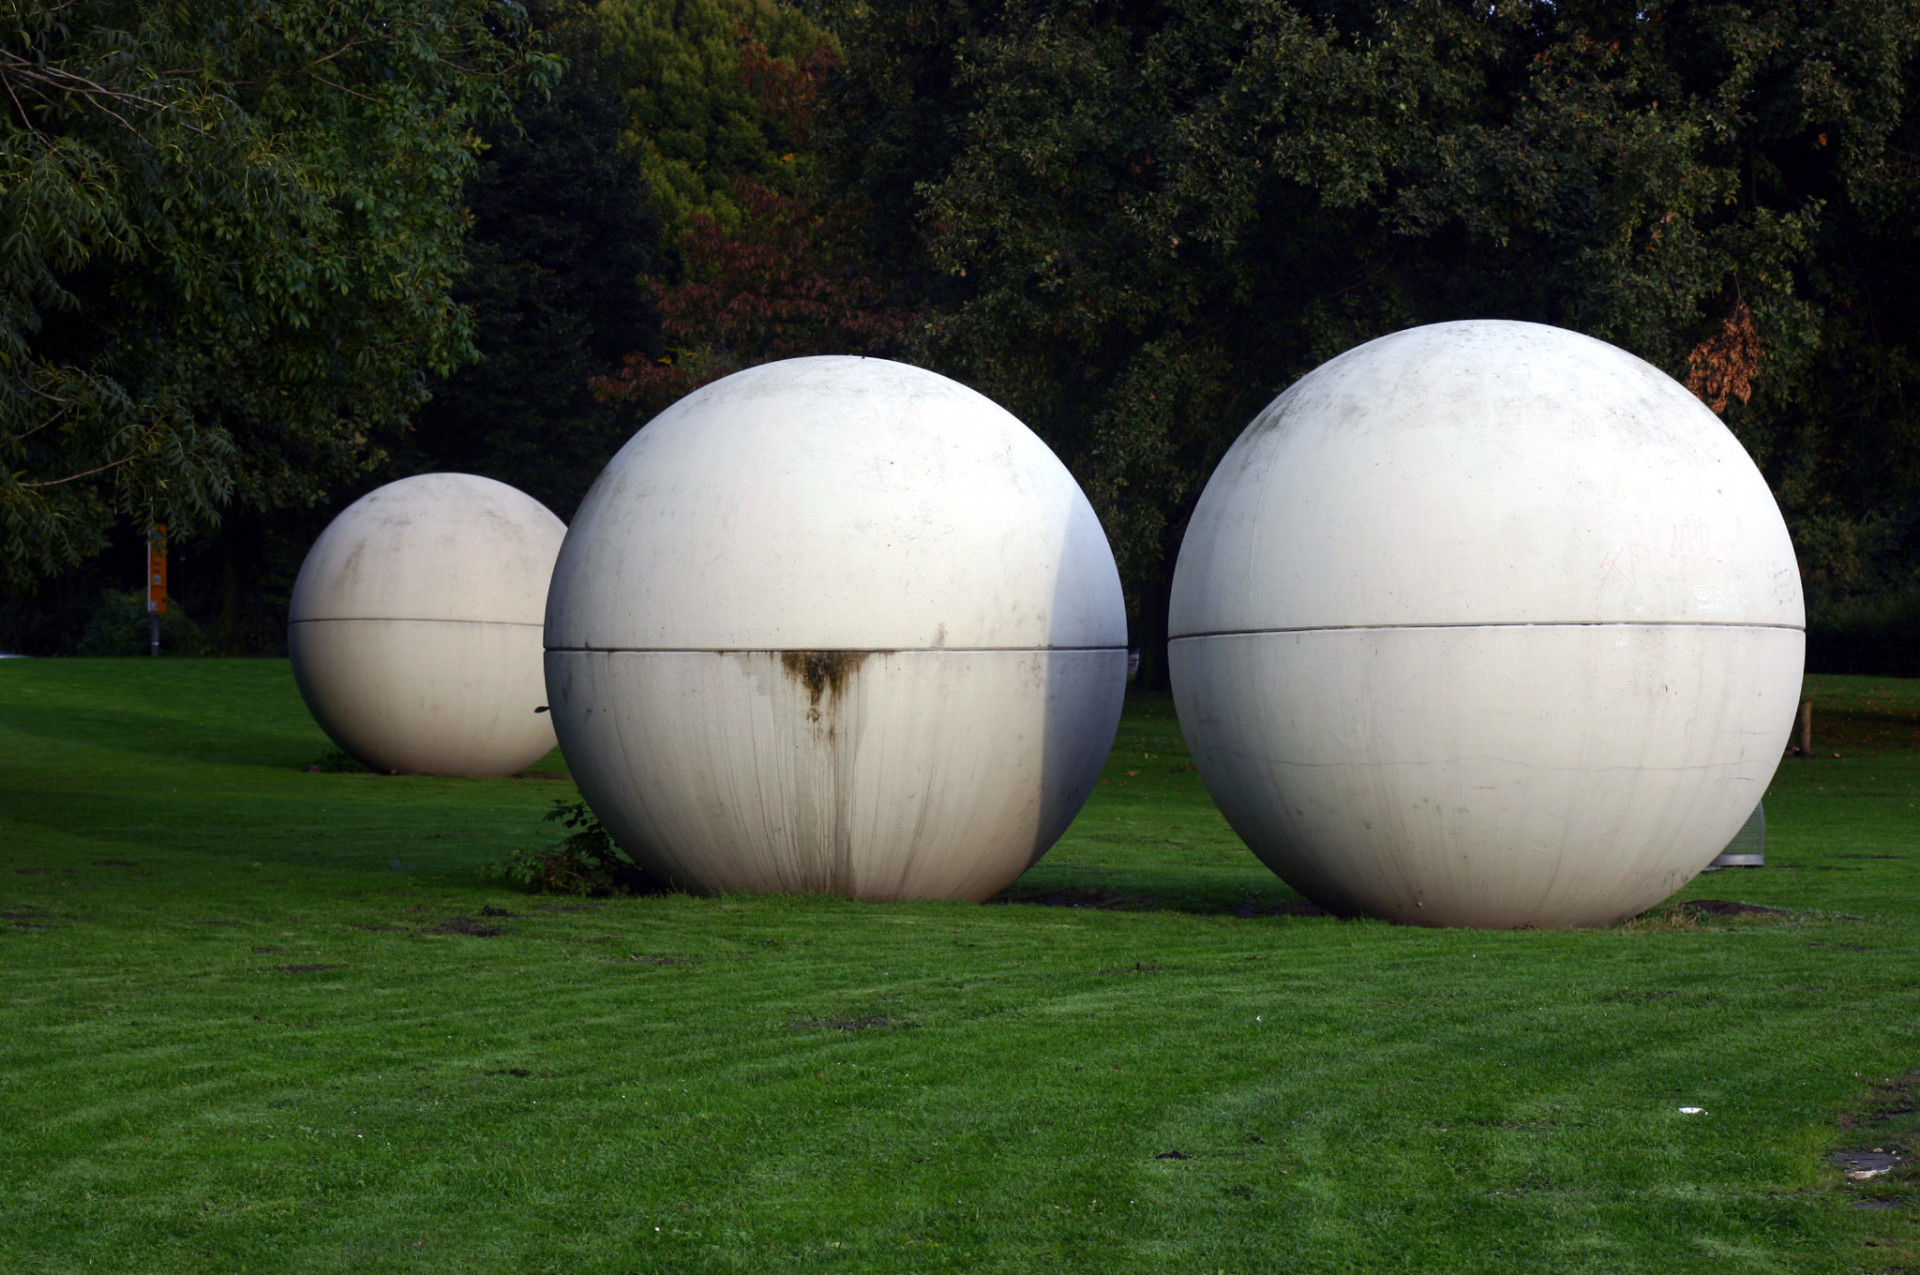 Claes Oldenburg, Giant Poolballs, 1977, Aasee, for the first edition of Skulptur Projekte.